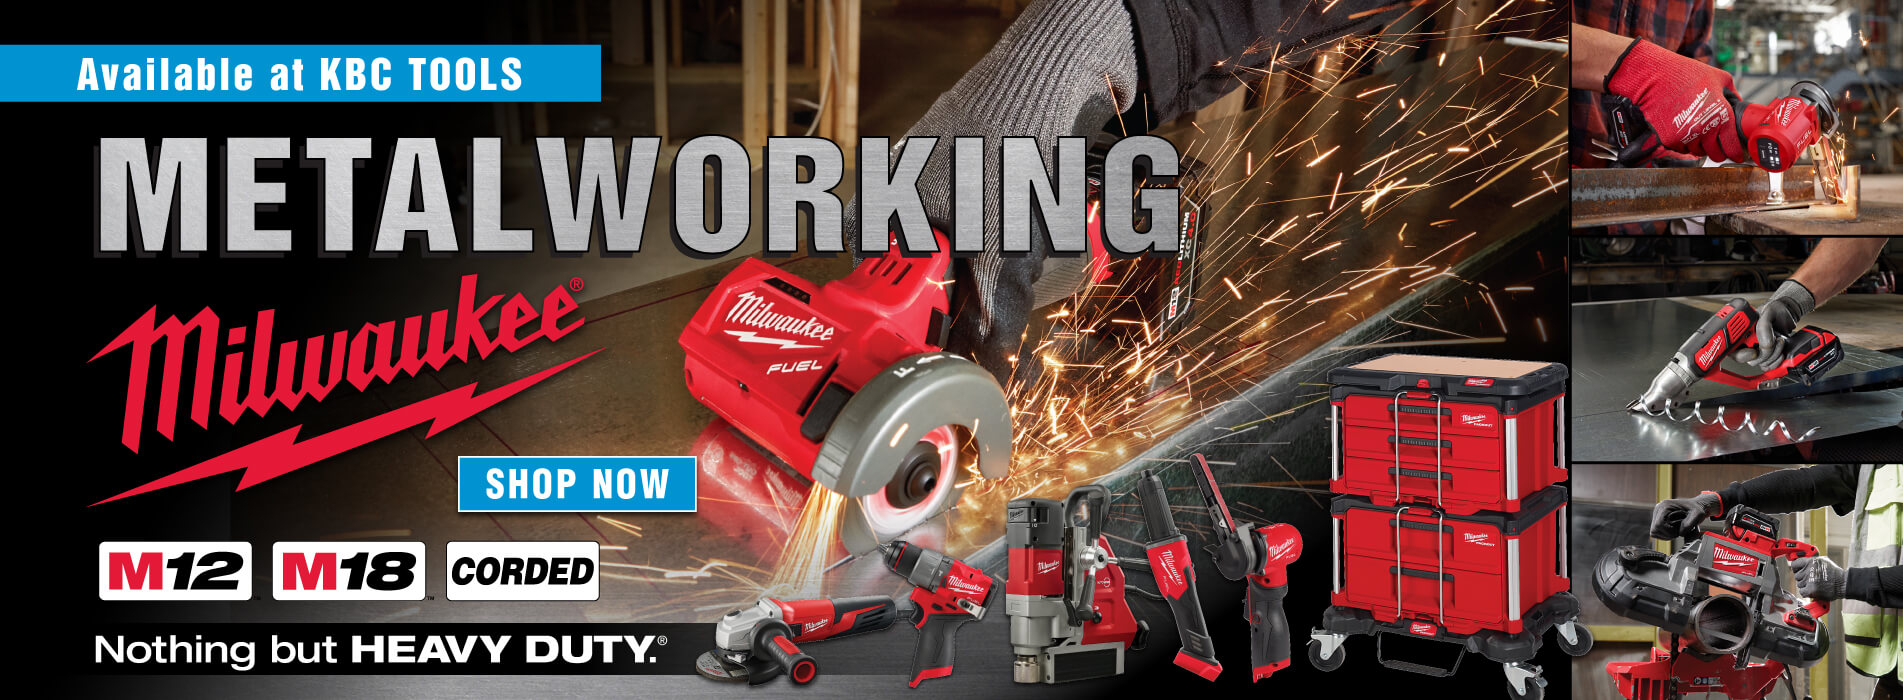 Milwaukee Metalworking Tools! Nothing but Heavy Duty!